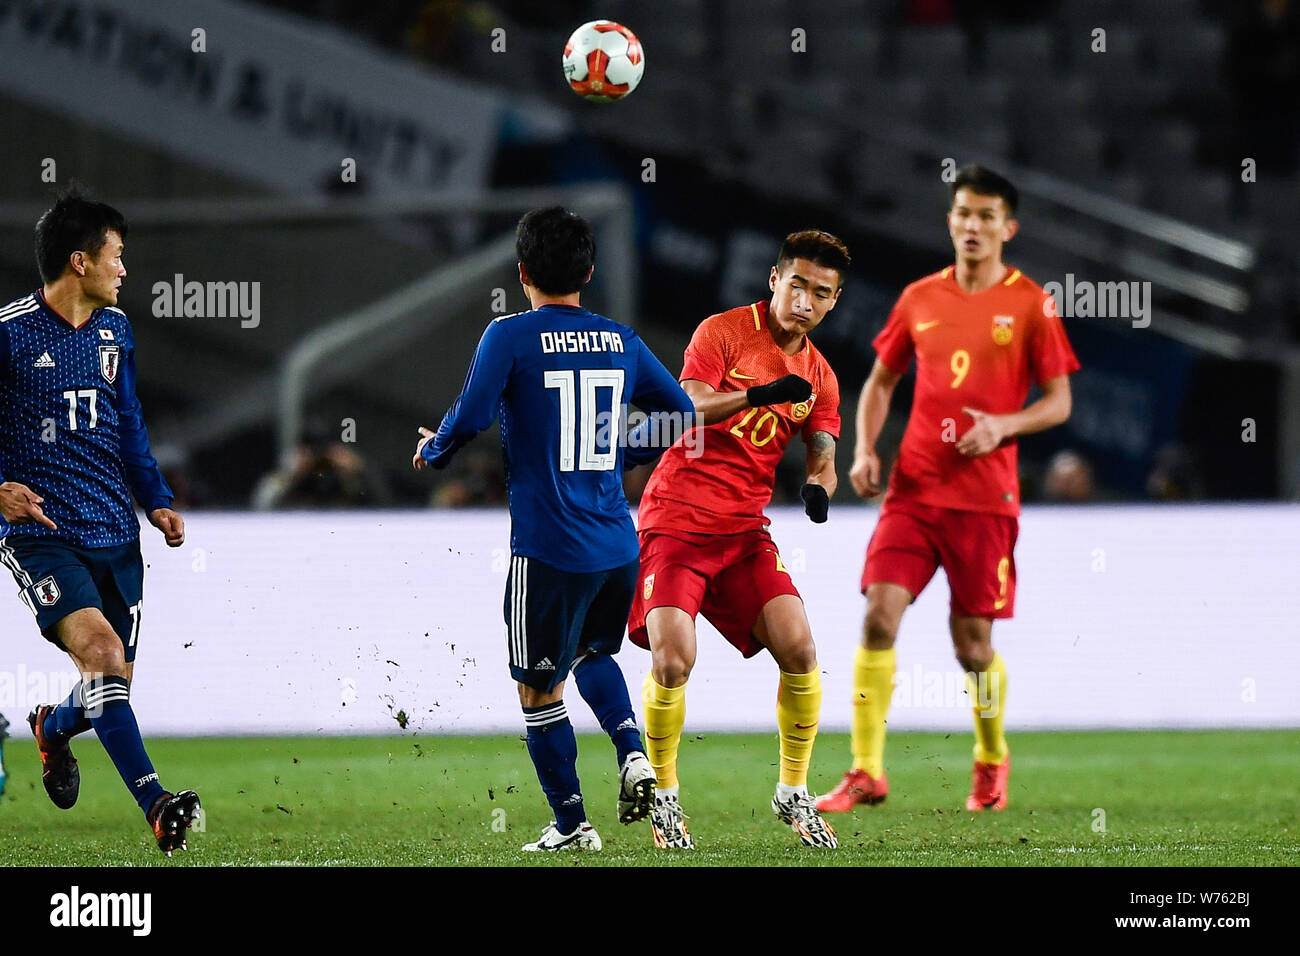 Wei Shihao, right, of China kicks the ball to make a pass against Oshima Ryota of Japan during the EAFF E-1 Football Championship 2017 Final Japan in Stock Photo